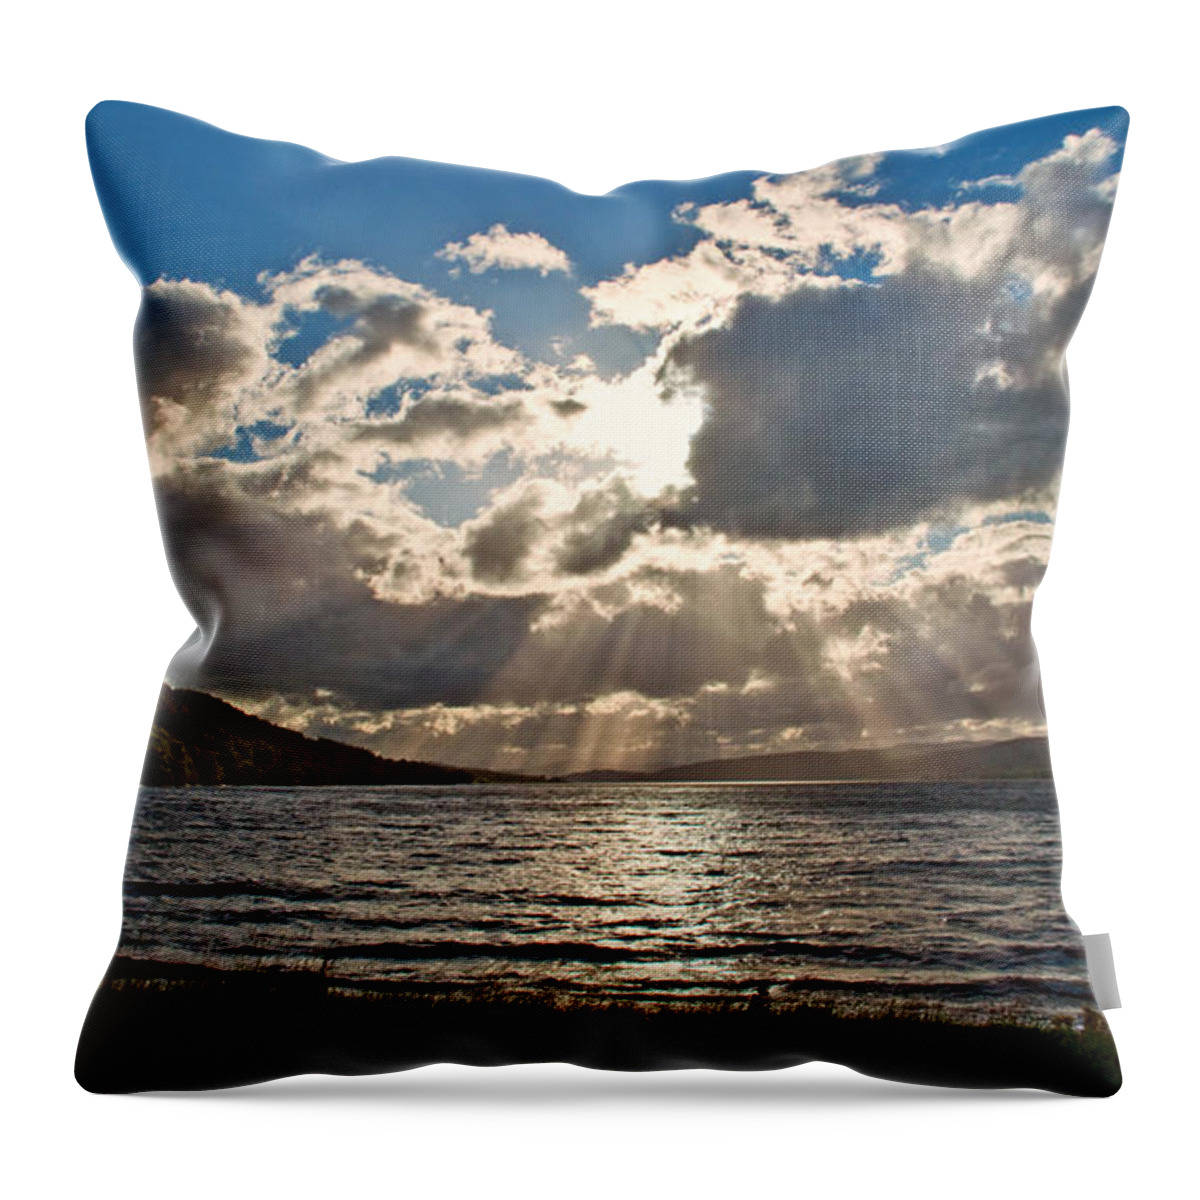 Sunrays Throw Pillow featuring the photograph Evening Sunrays by Chris Thaxter